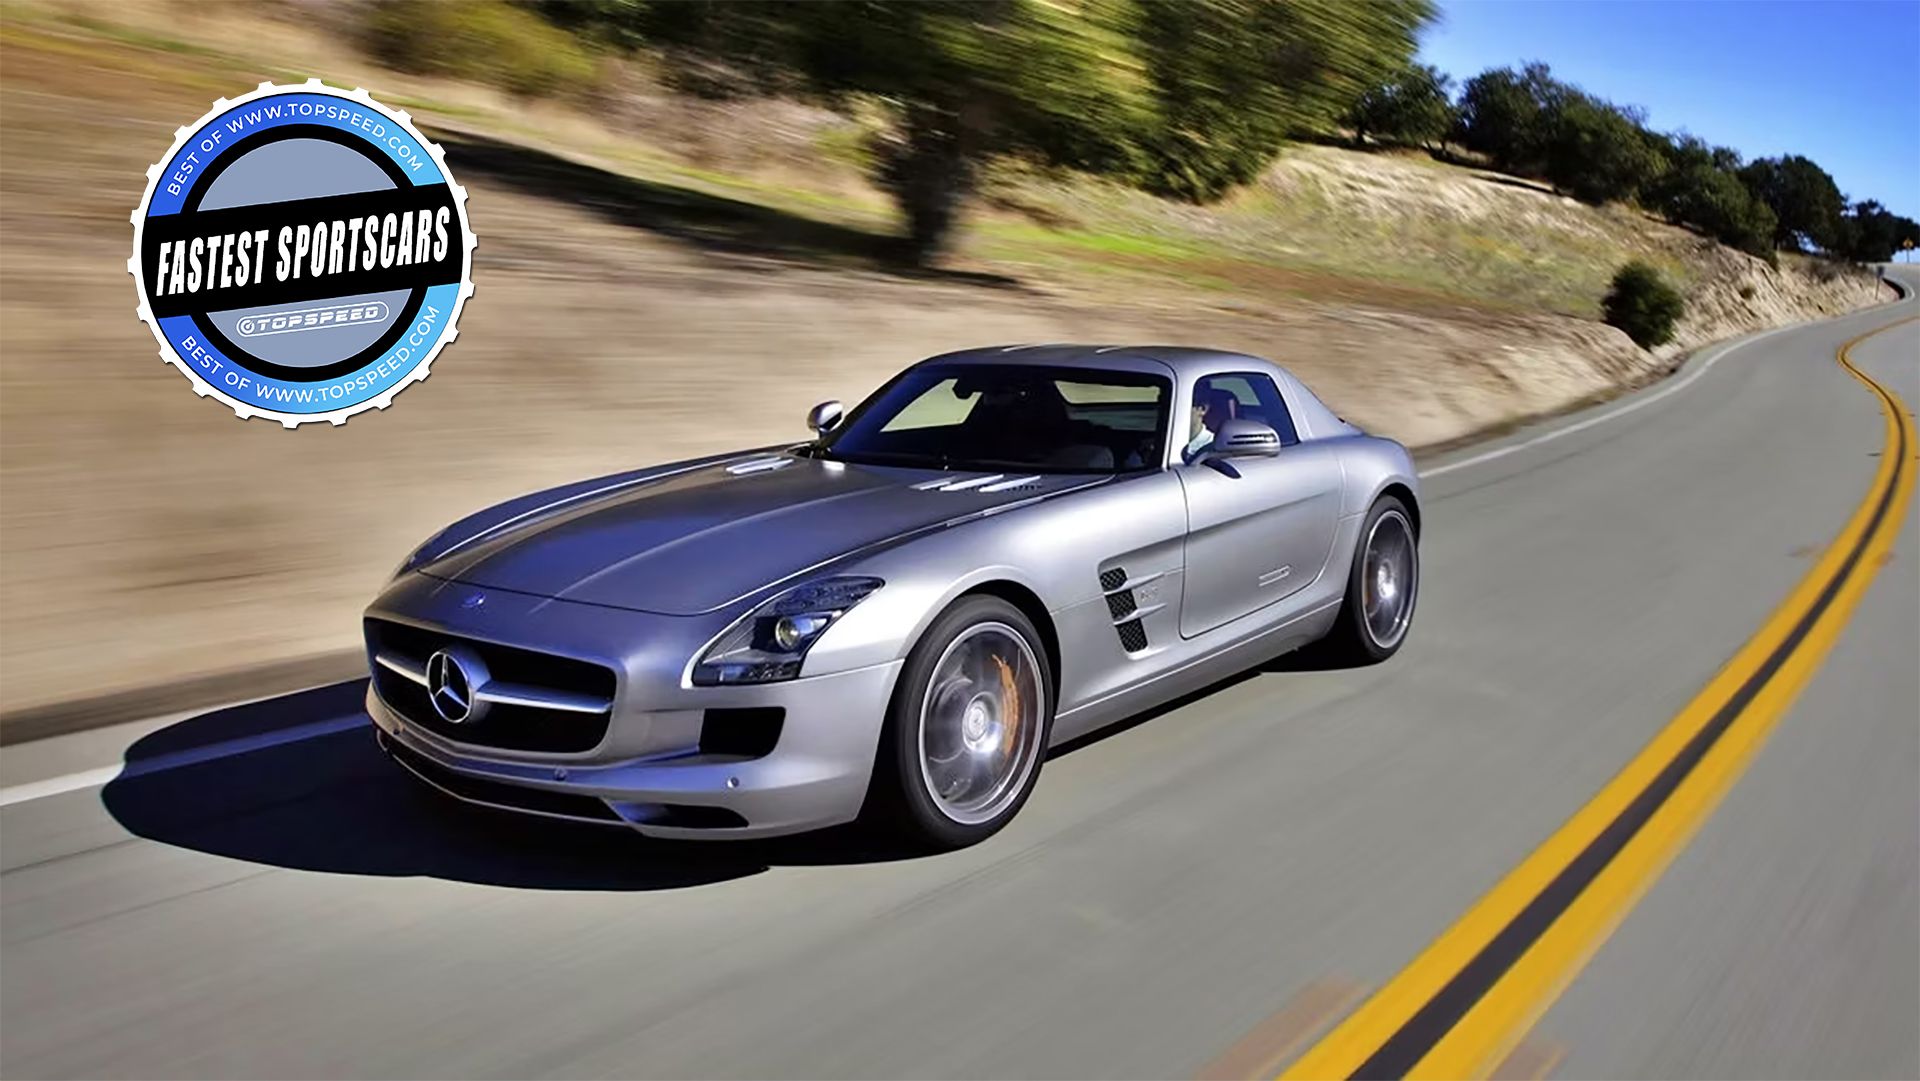 11 Things You Didn't Know About Mercedes-Benz